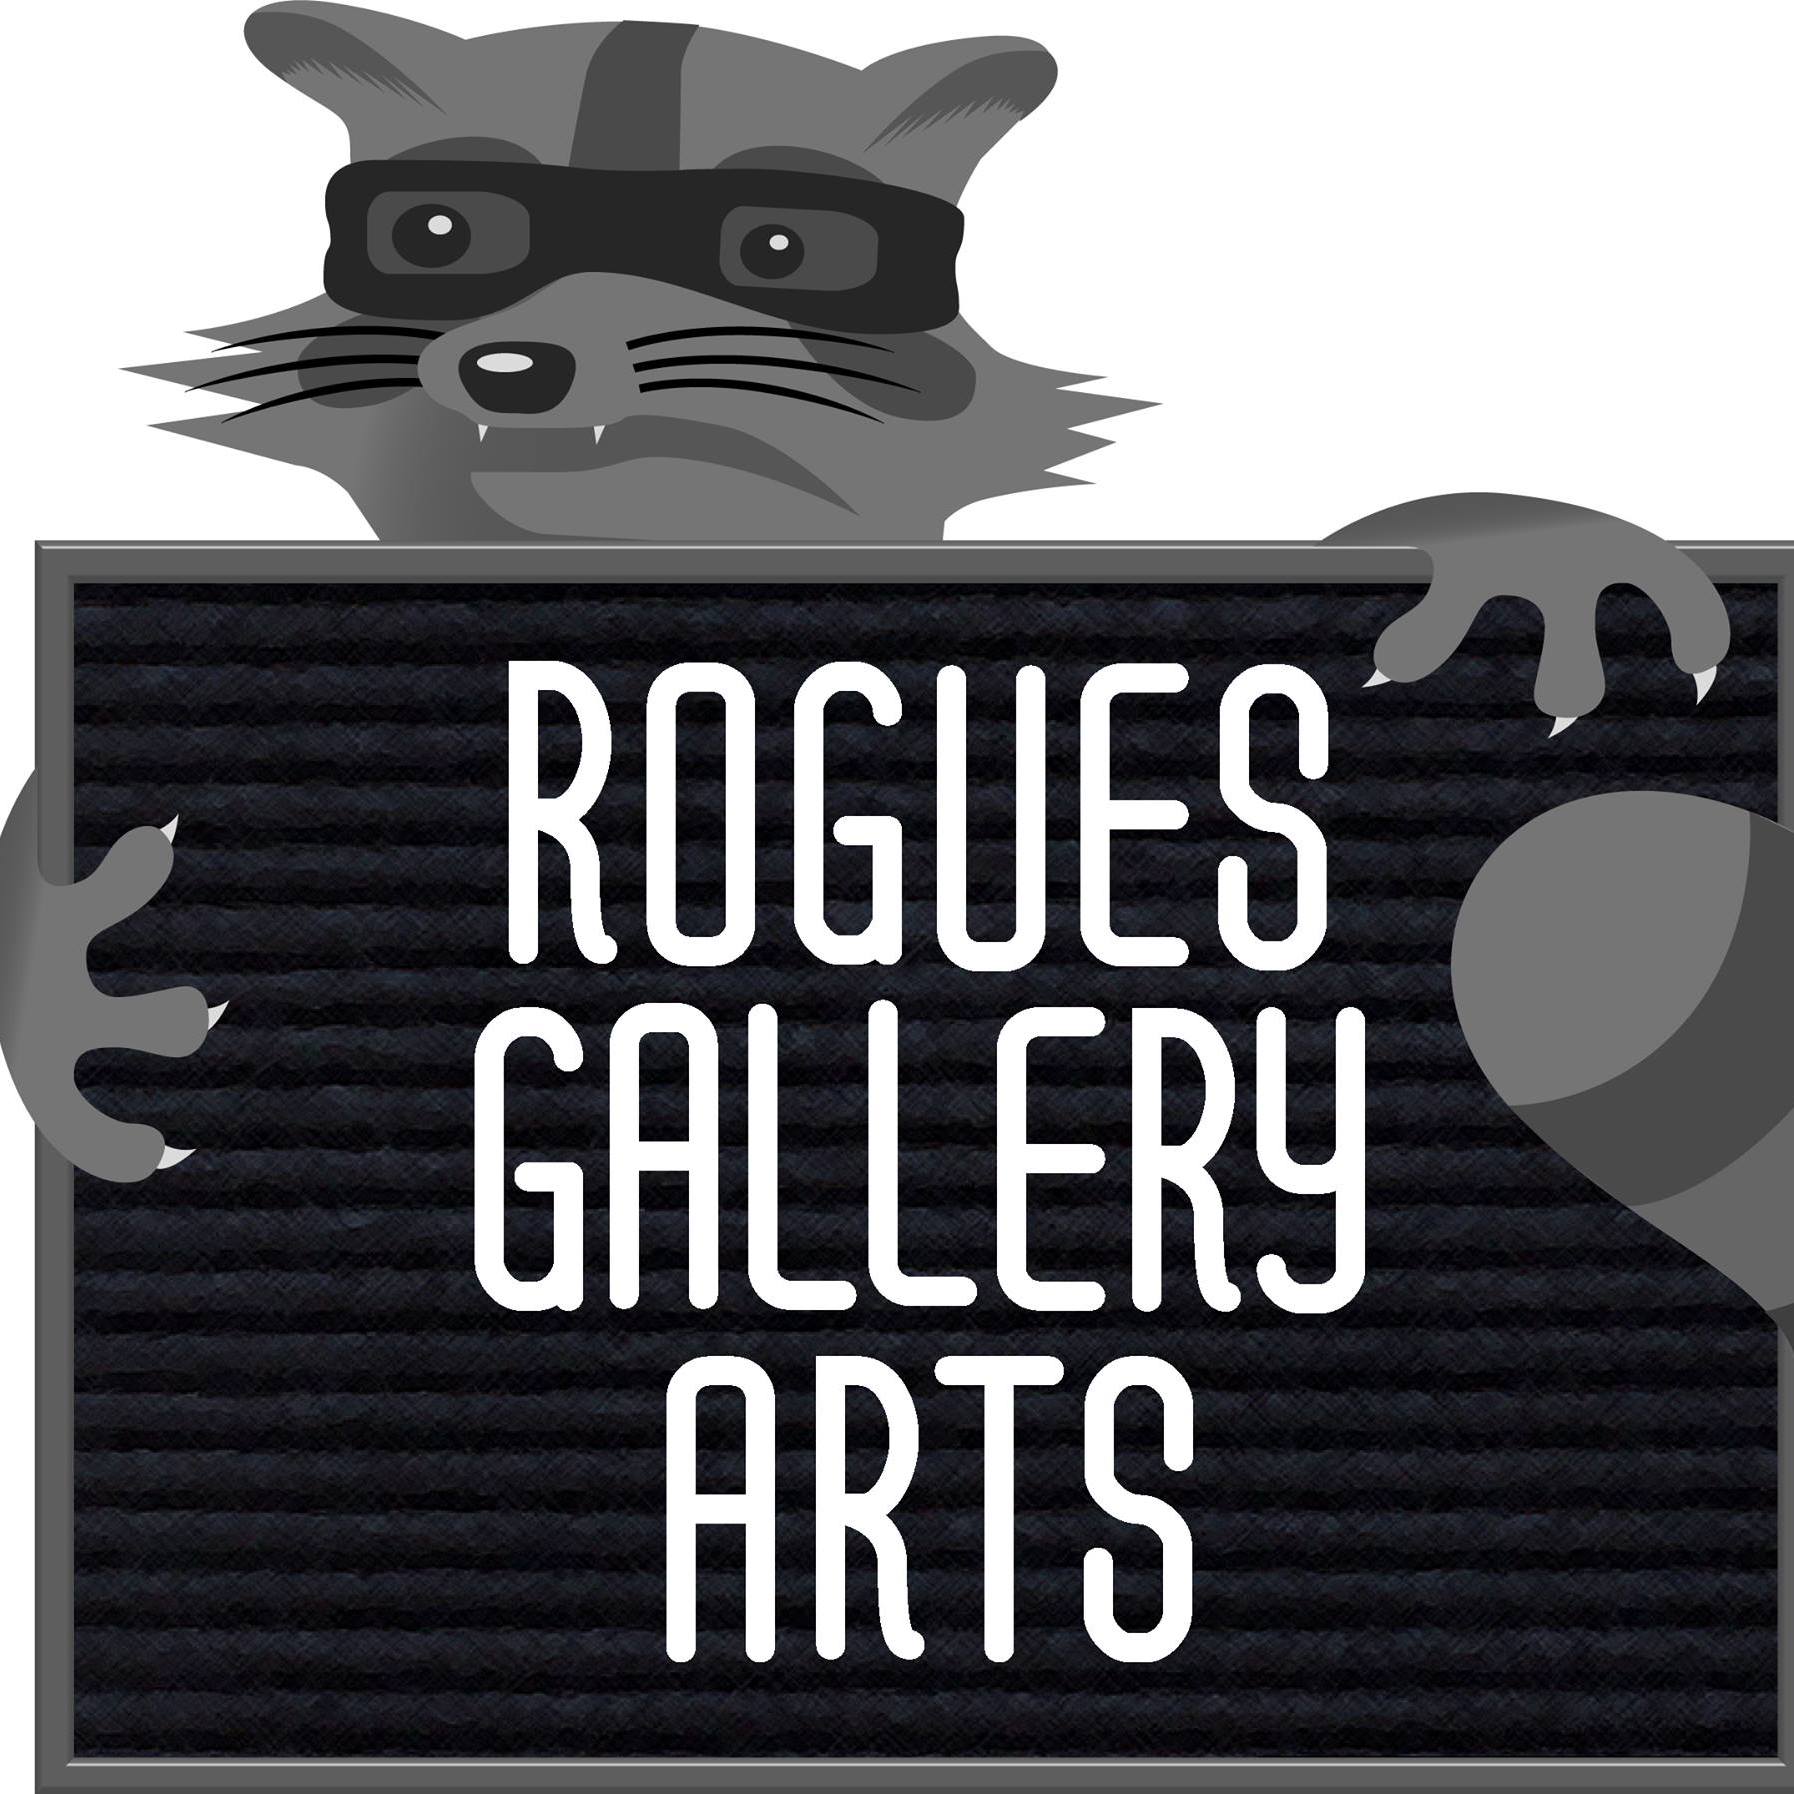 Rogues Gallery Arts logo- a racoon in a mask holding a board with the company name on it